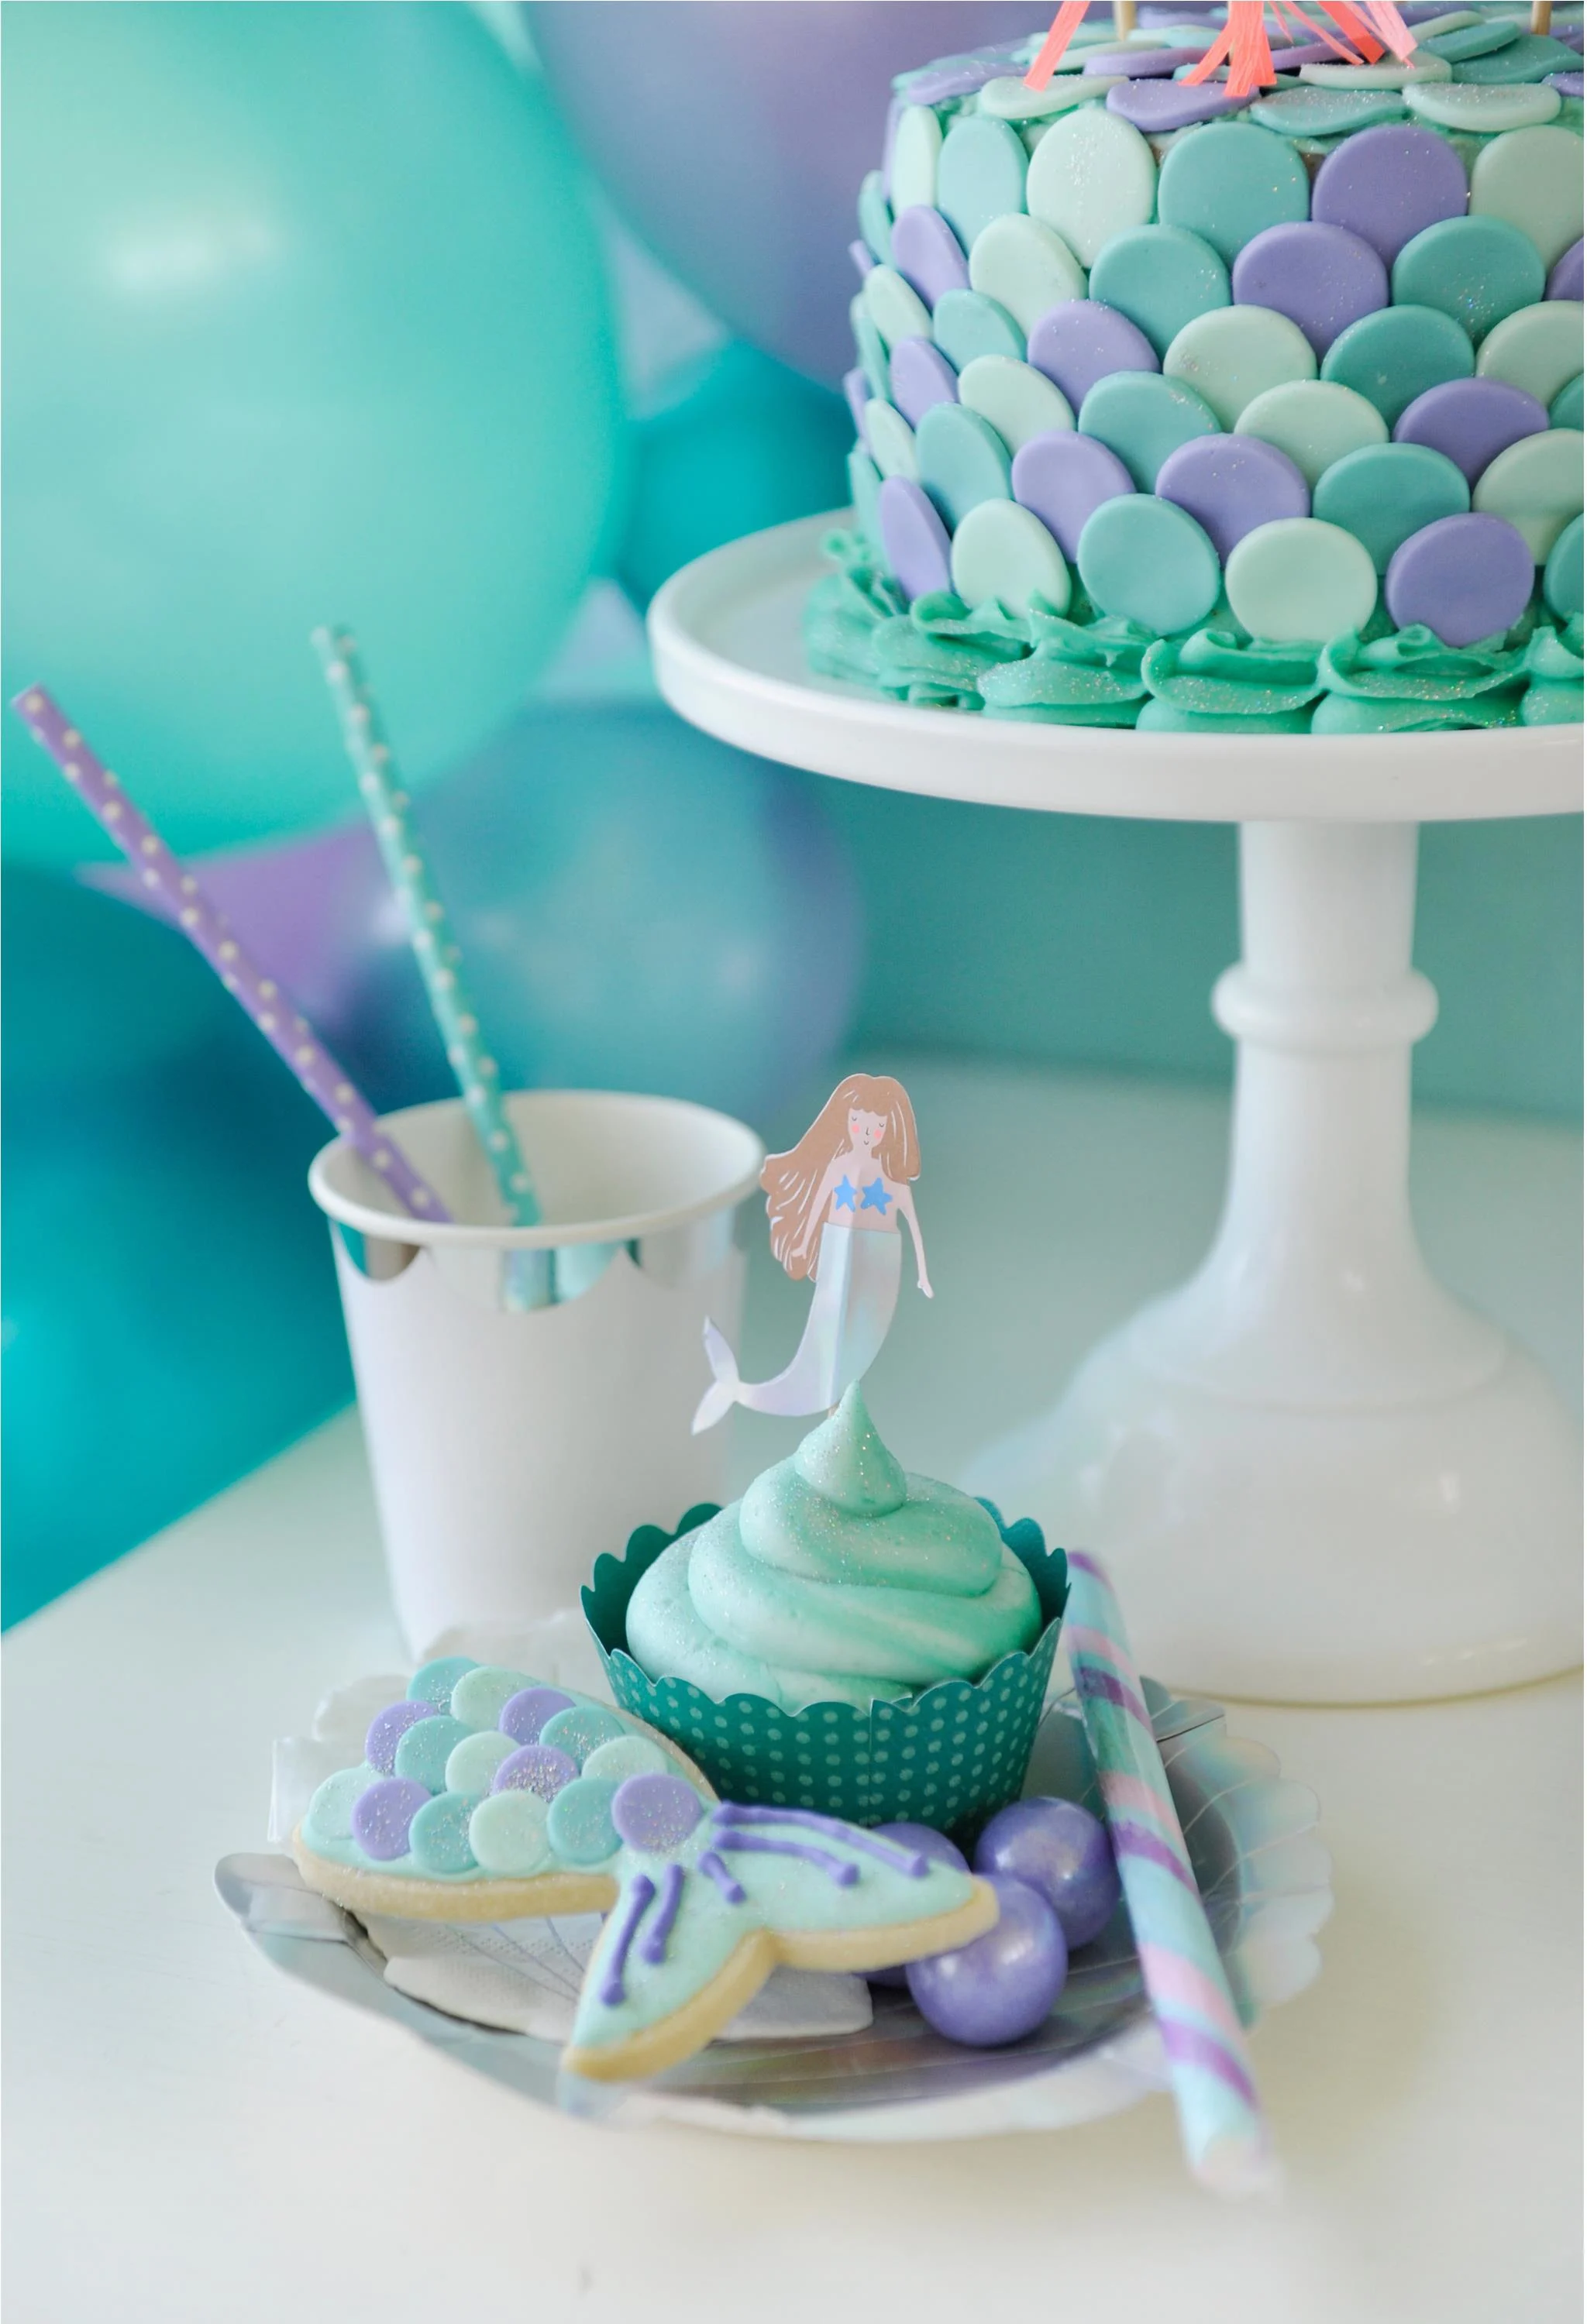 Splash On Over to this Adorable Mermaid Party! - Project Nursery